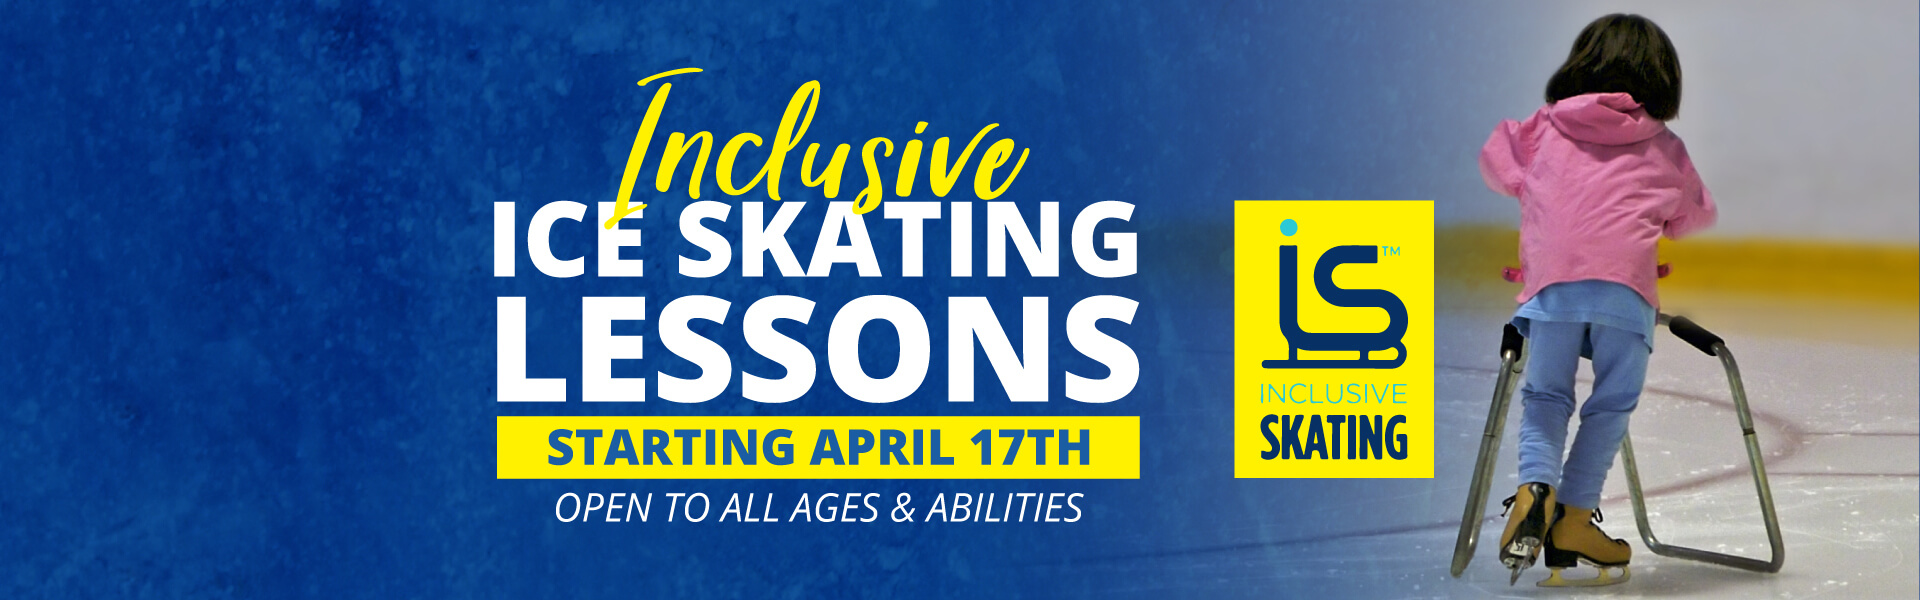 Inclusive Ice Skating Lessons